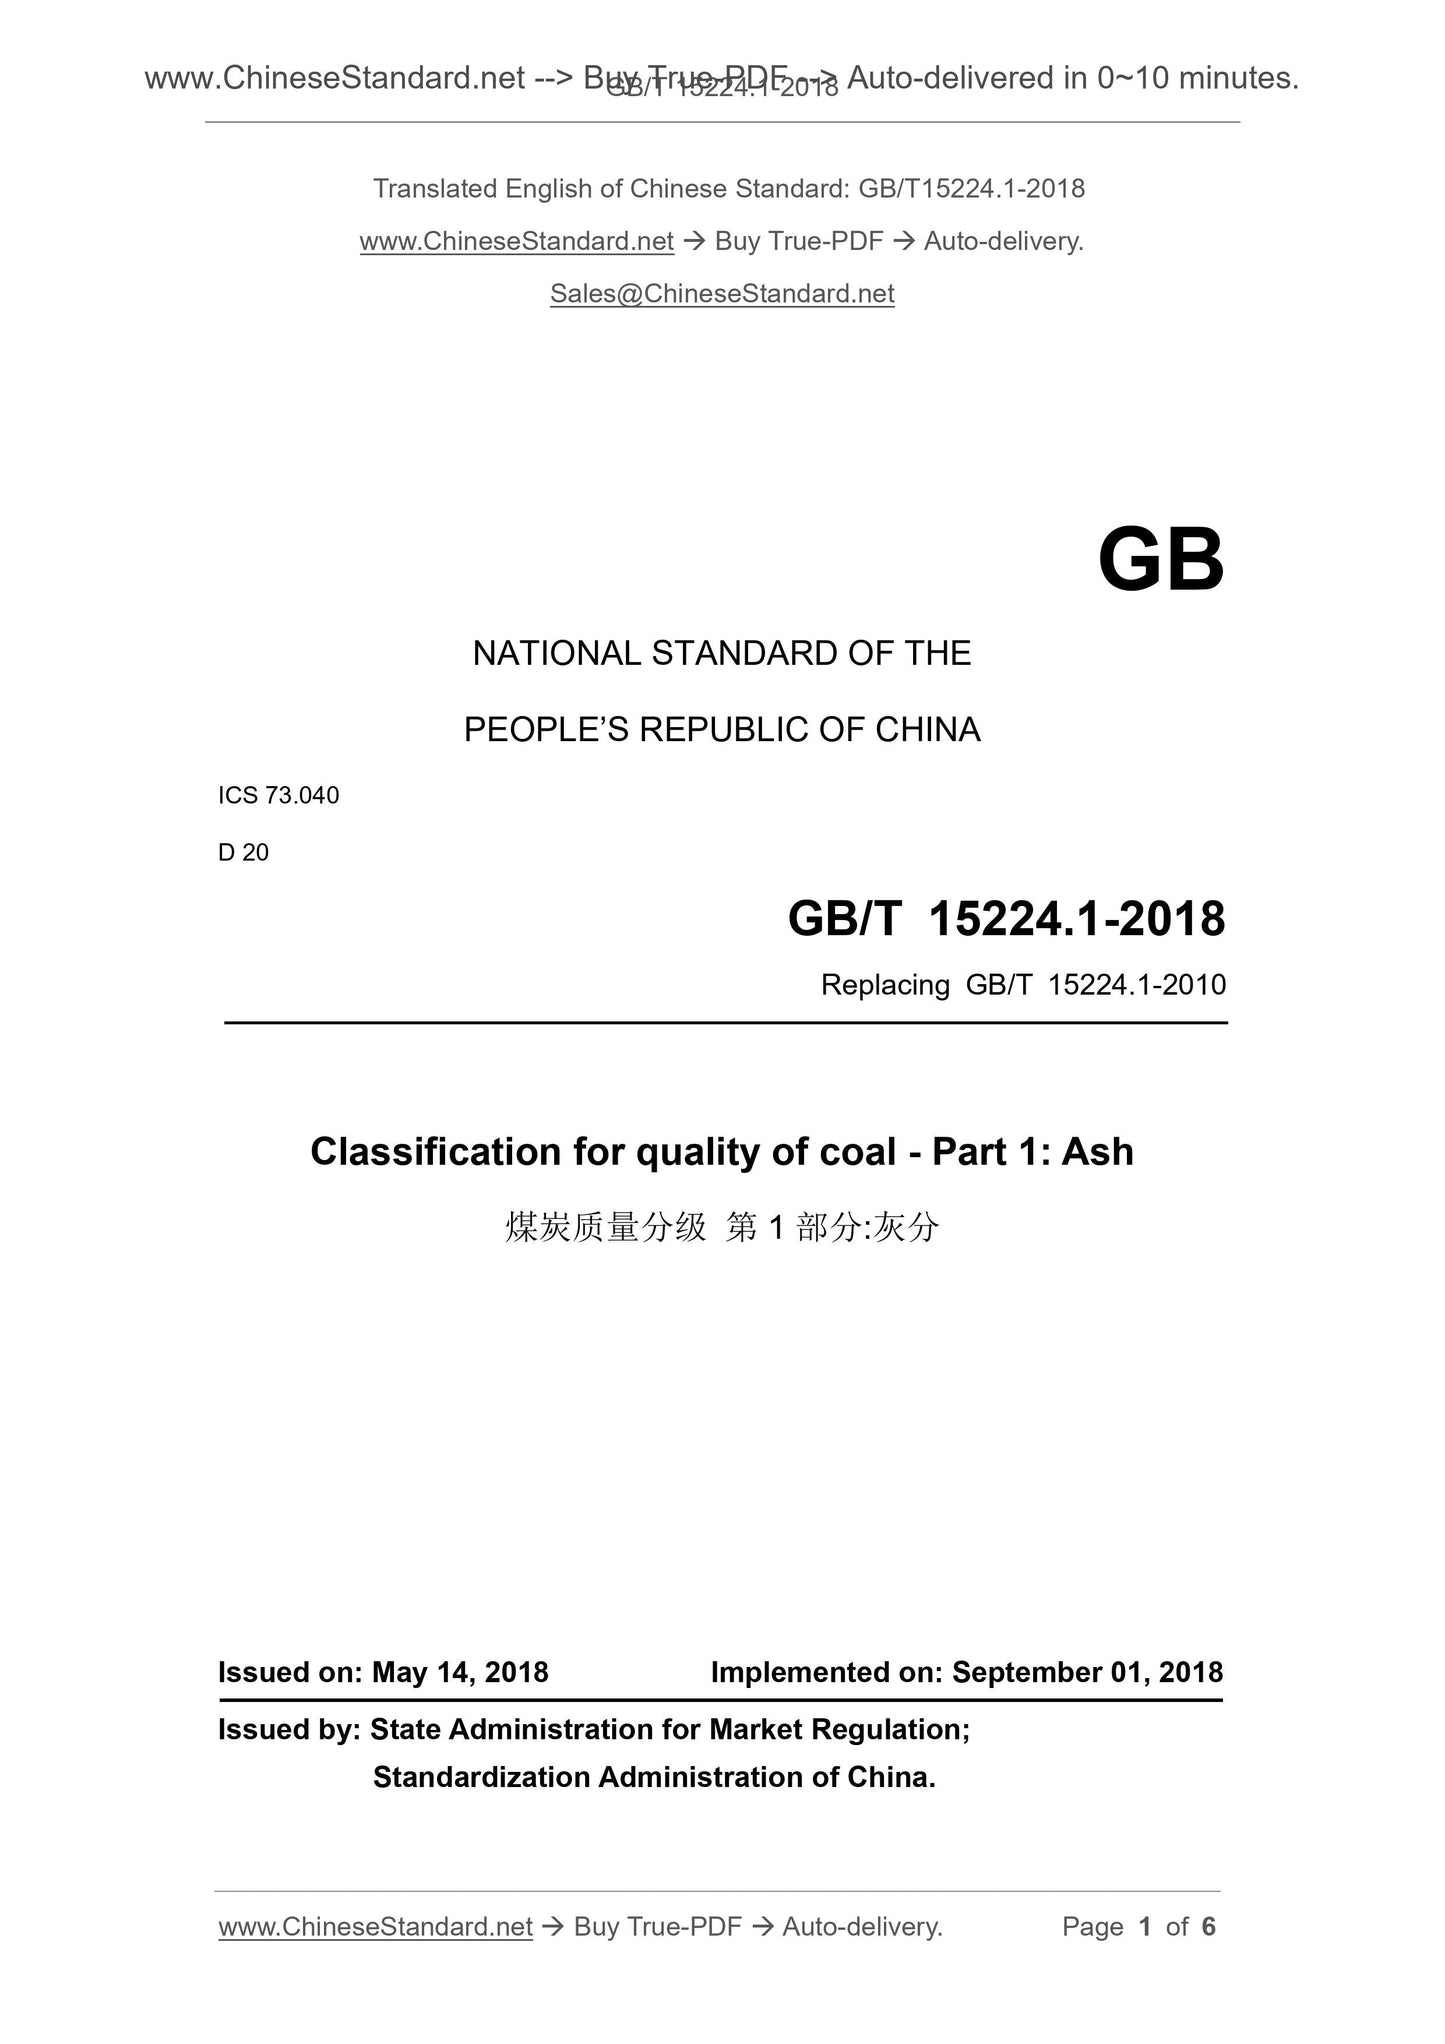 GB/T 15224.1-2018 Page 1